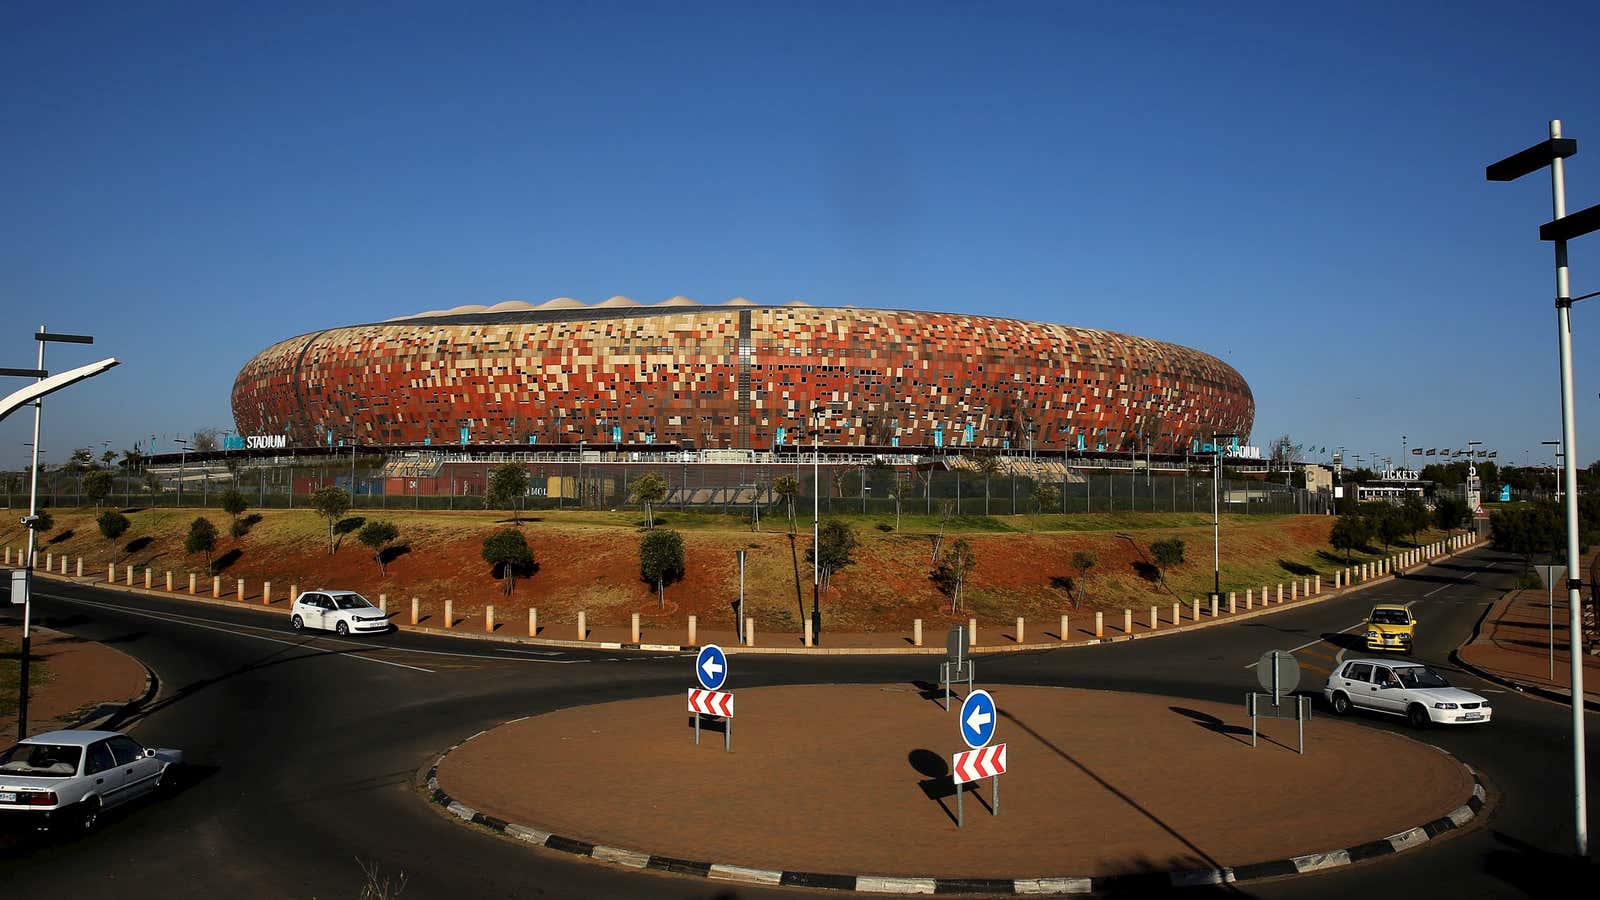 Costly white elephants left behind from the 2010 Fifa World Cup